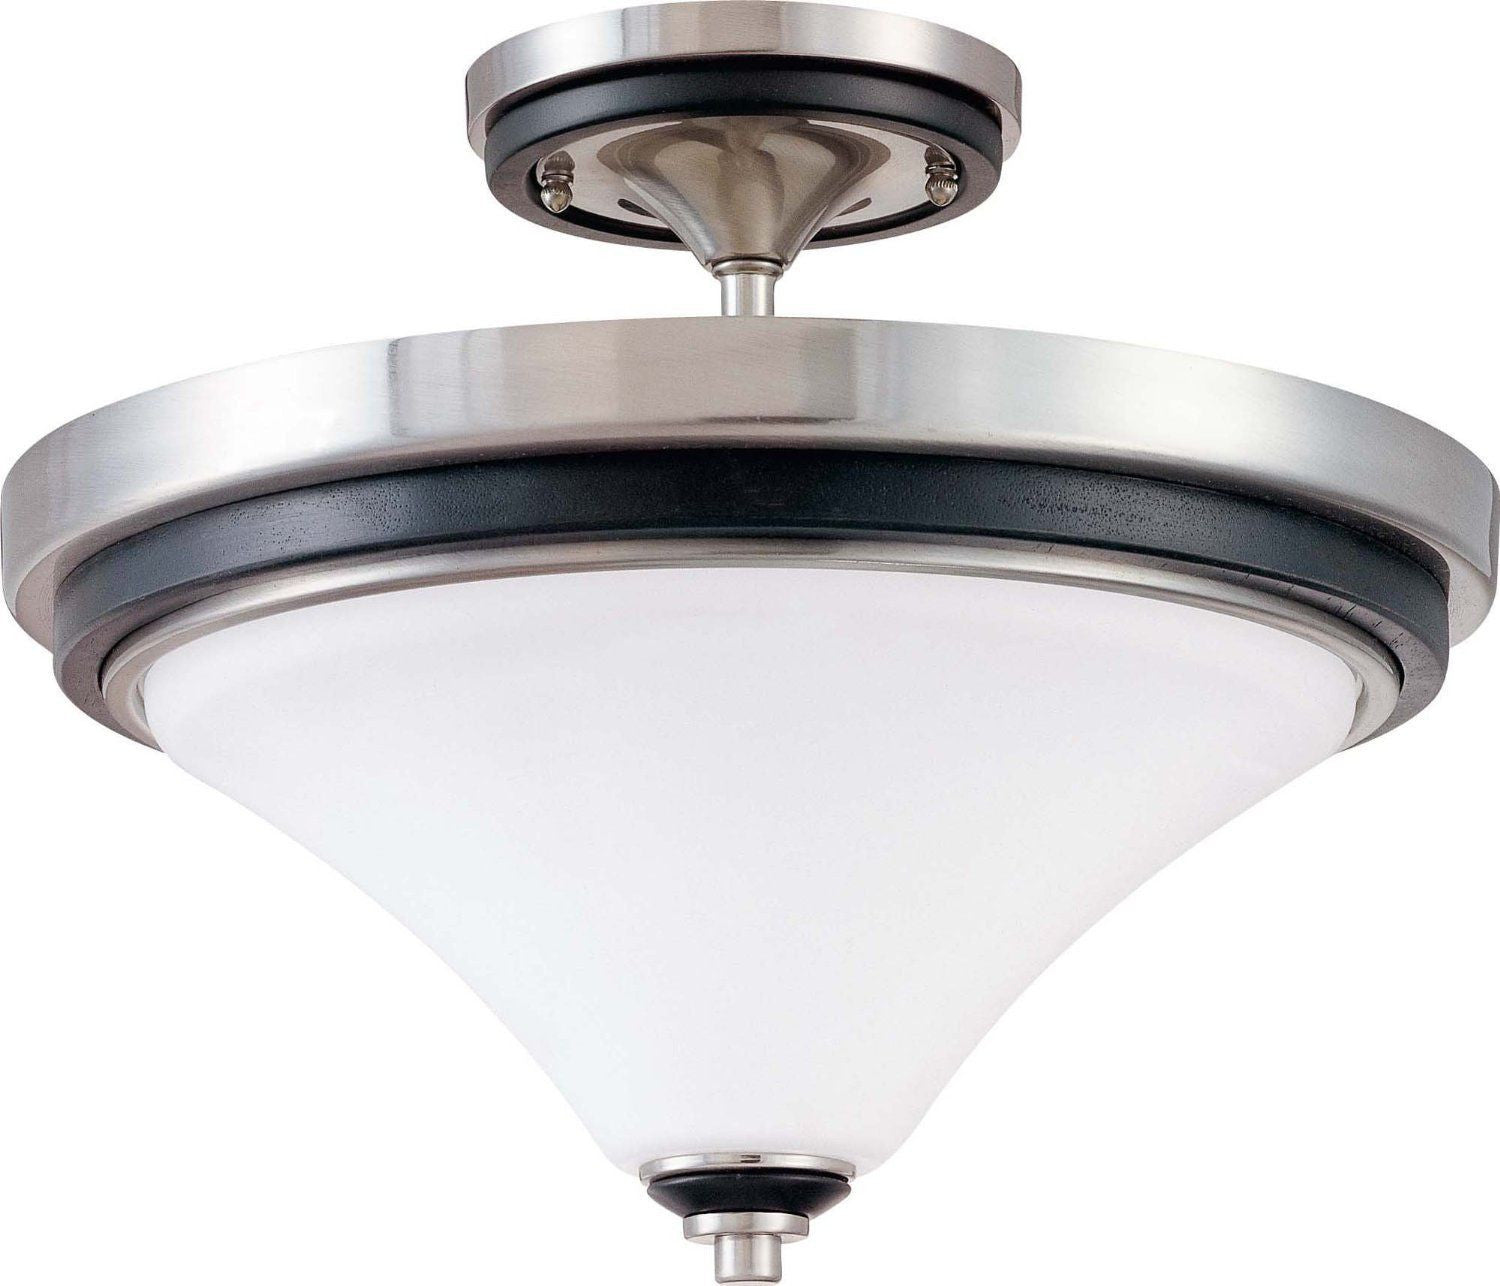 Nuvo Lighting 60-1747 Keen Collection Two Light Semi Flush Ceiling Mount in Brushed Nickel Finish